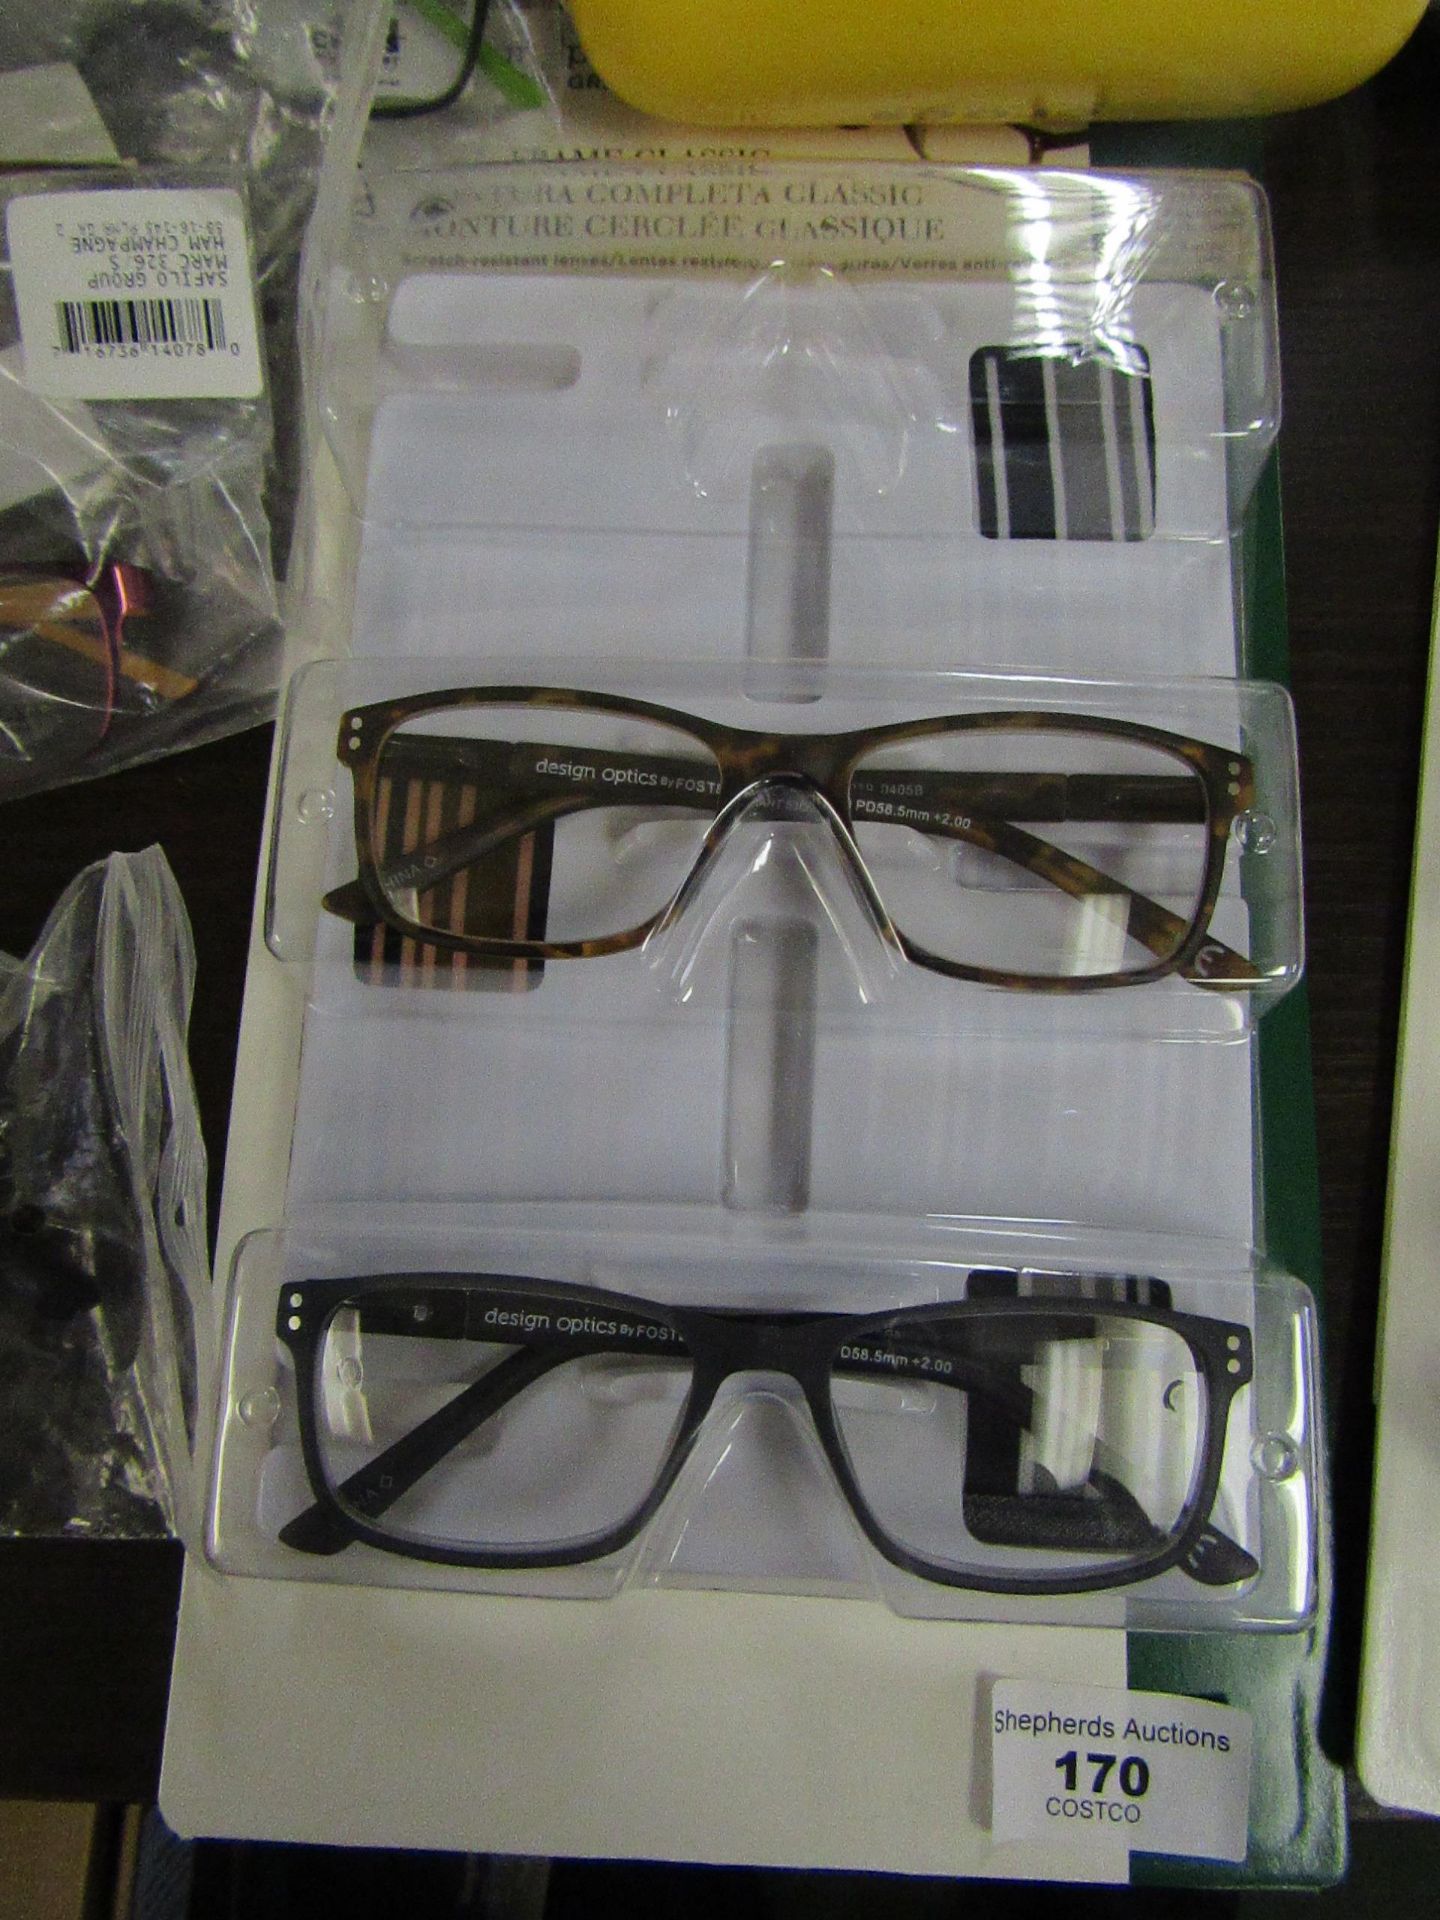 2x Pairs of Foster Grants +2.00 reading glasses, in packaging